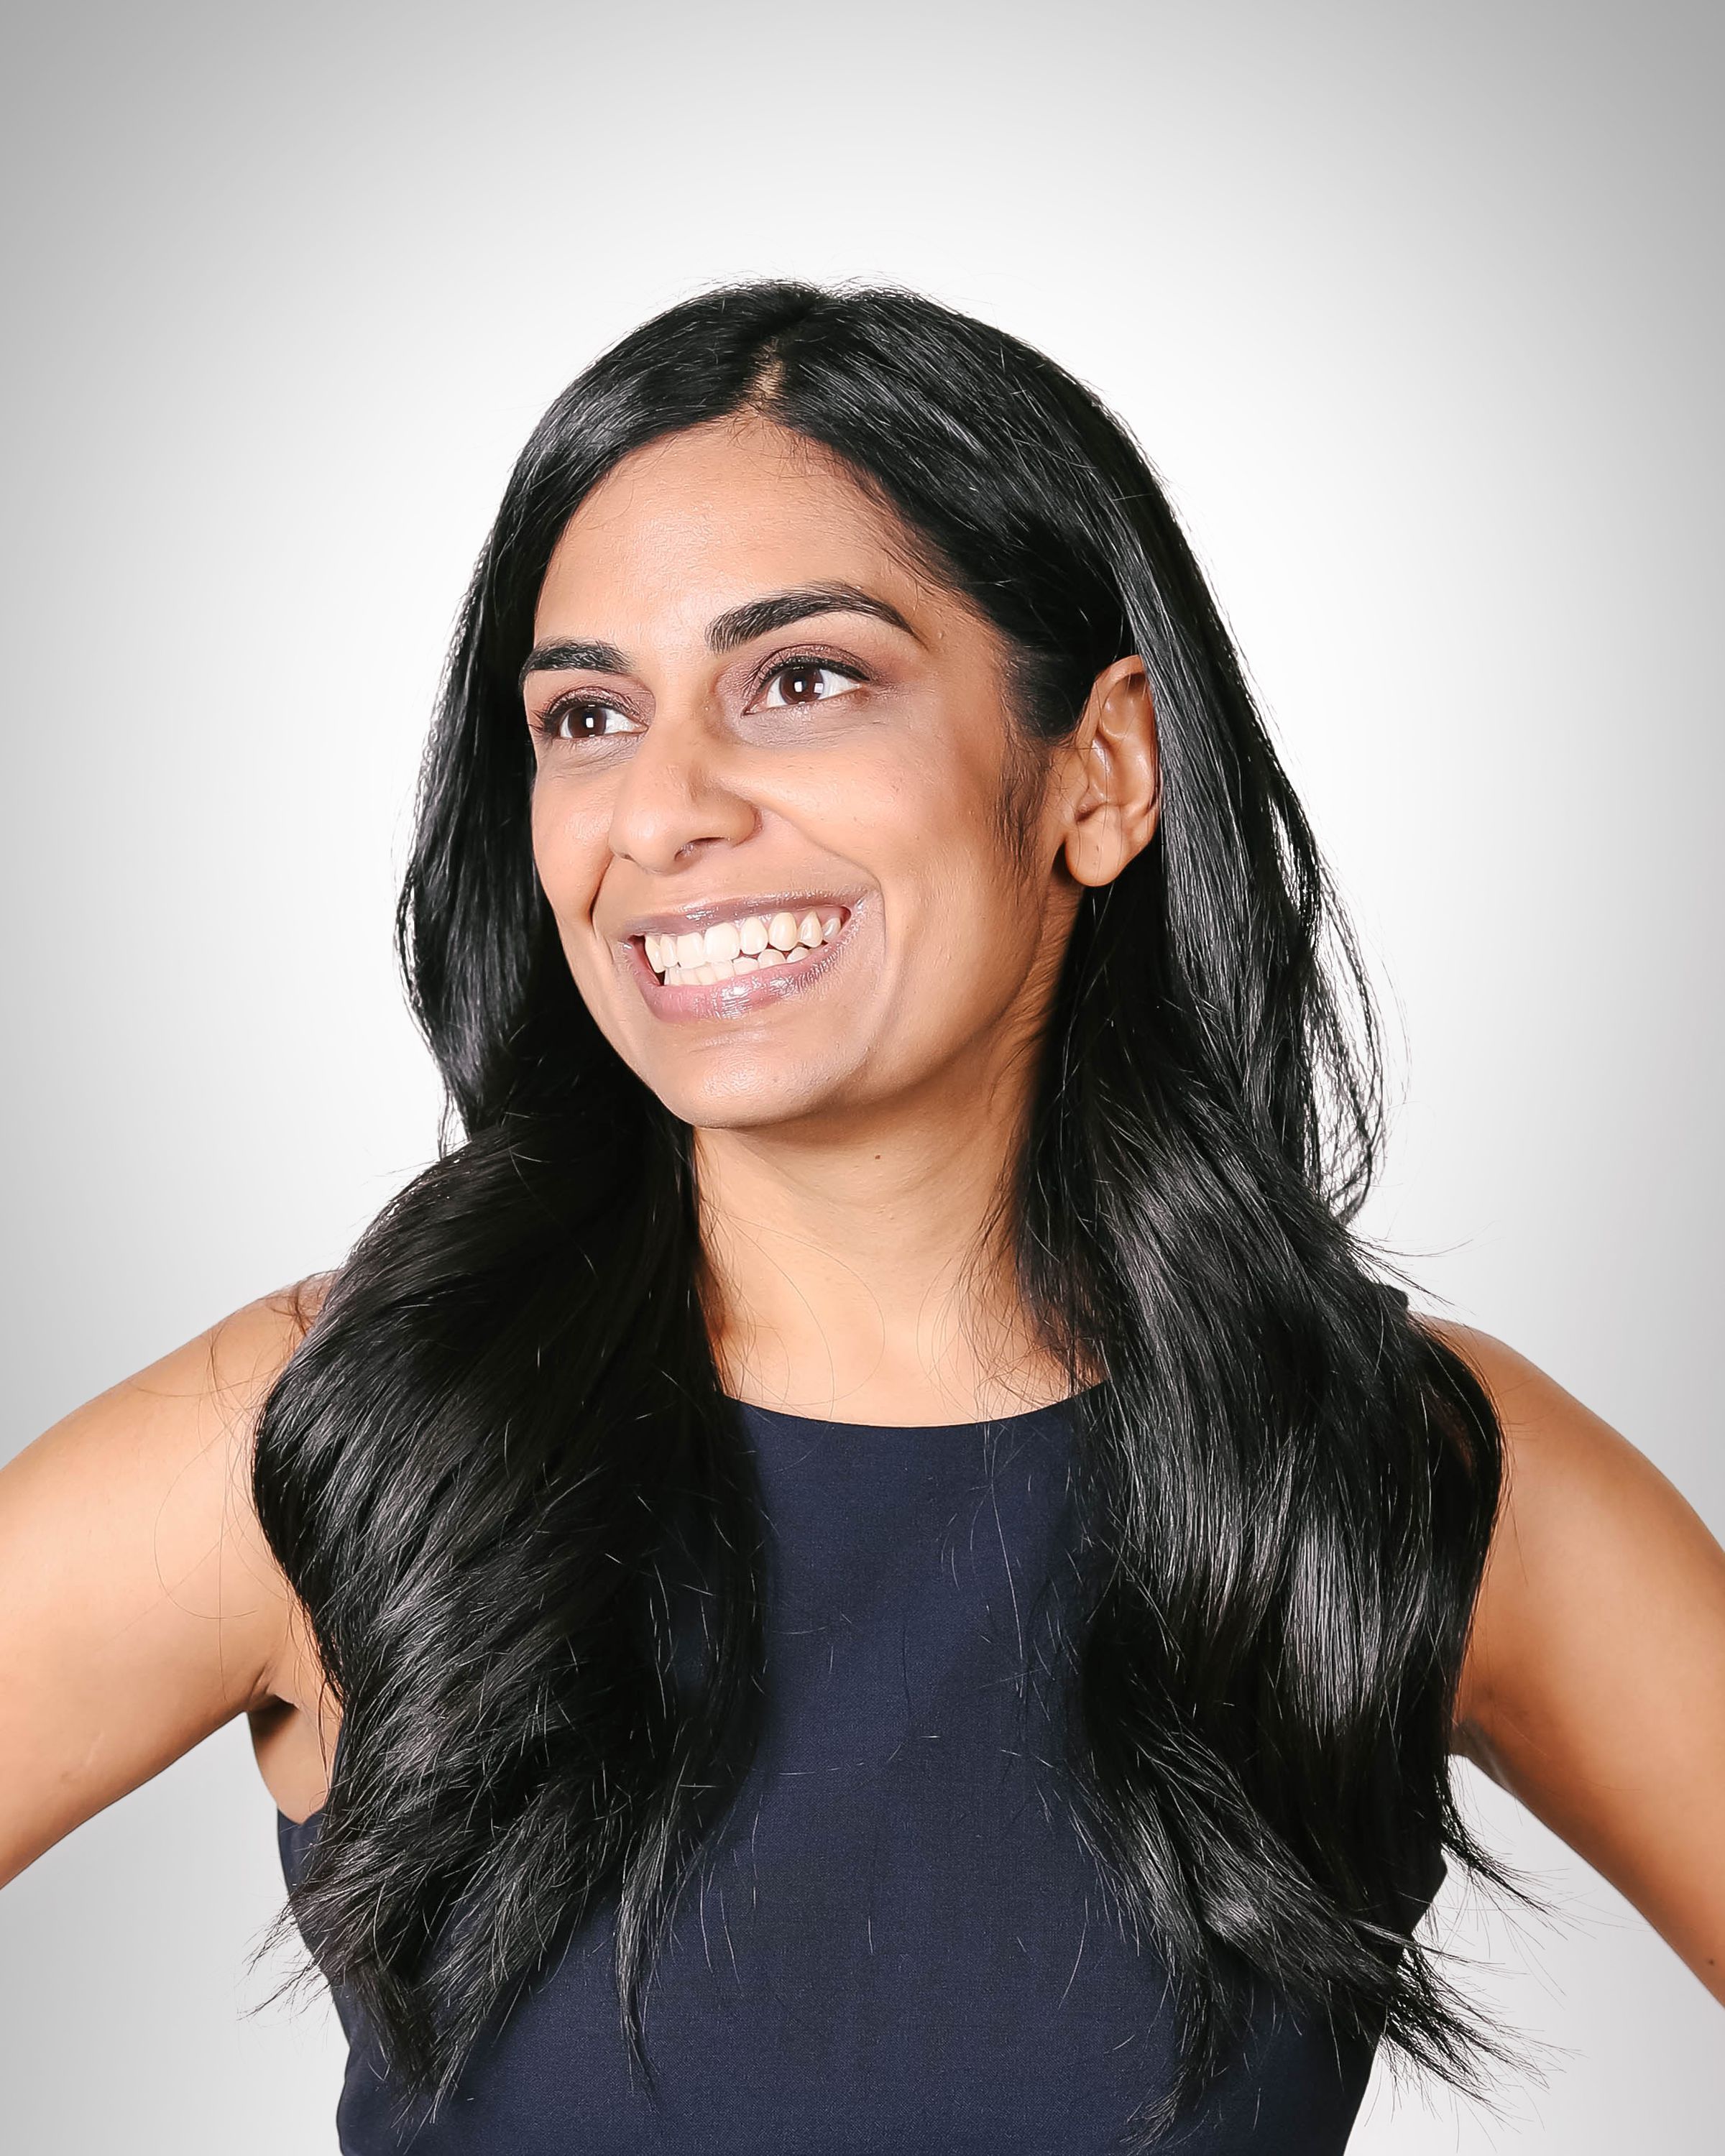 Neha Parikh is the youngest and first female president of Hotwire.